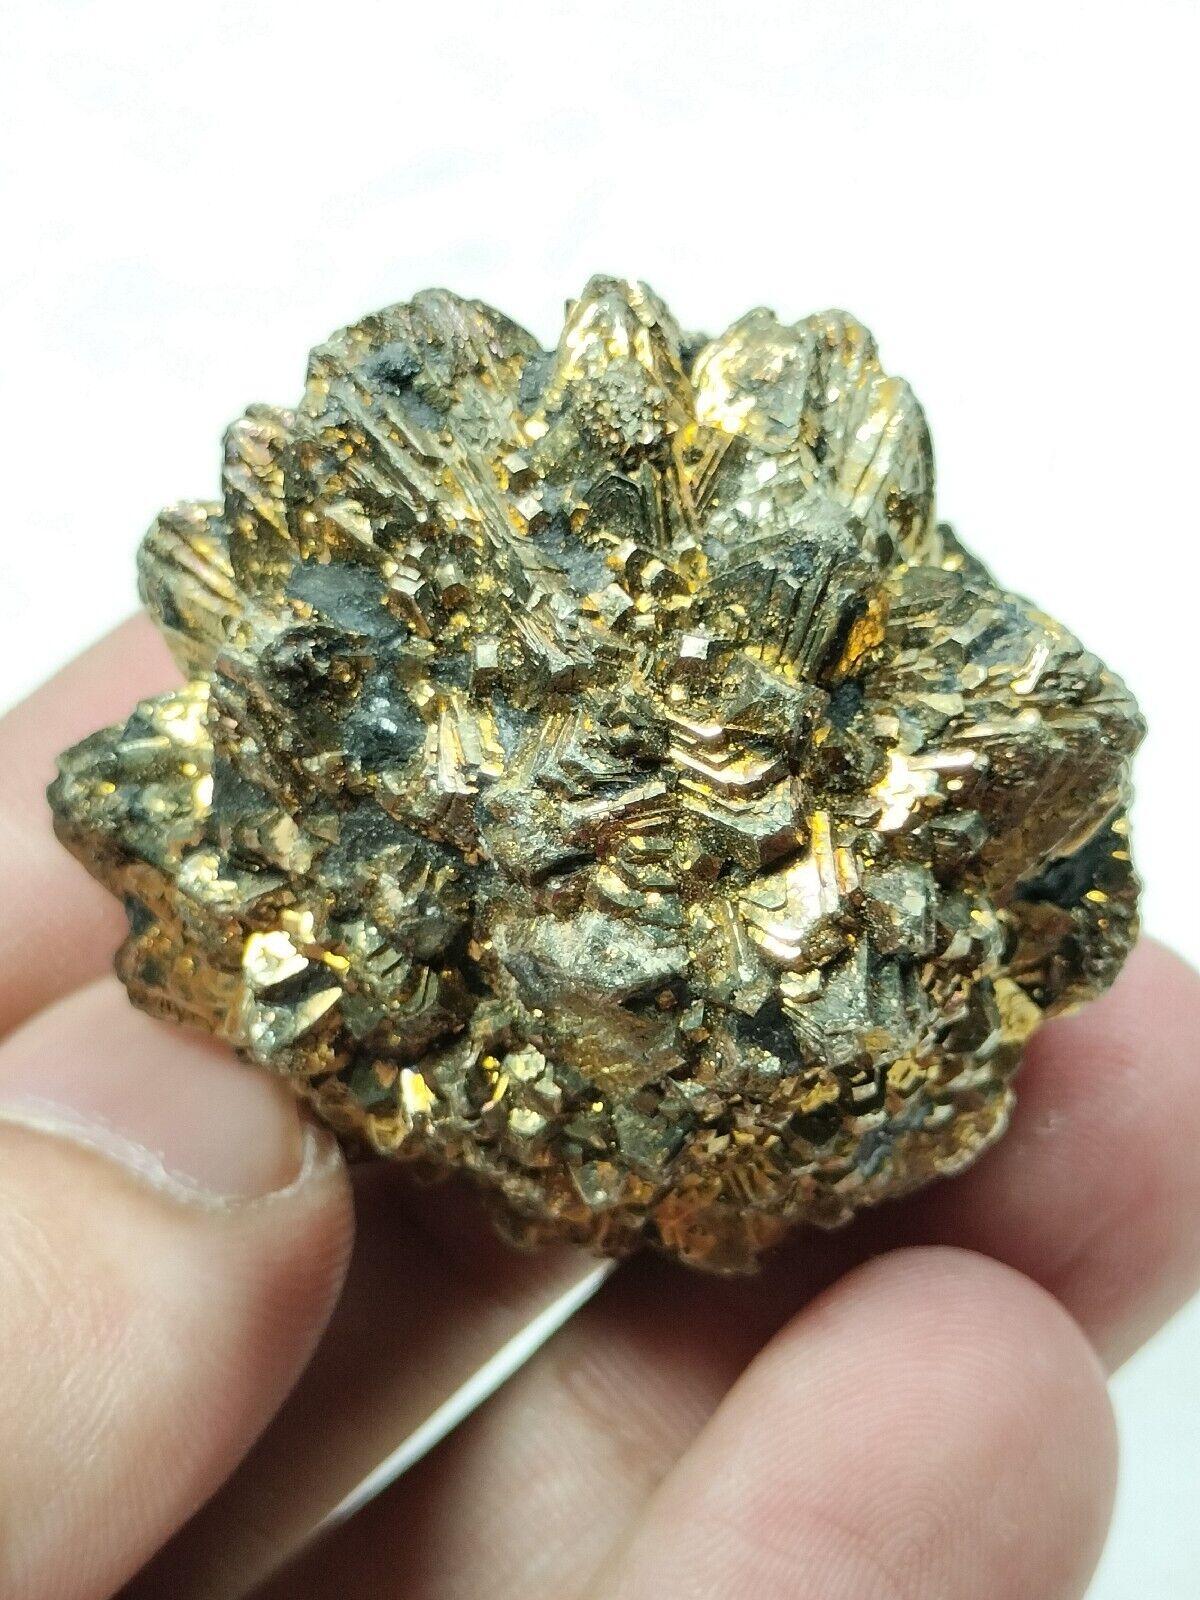 Golden pyrite star formation after Marcasite AKA white iron pyrite from Pak.